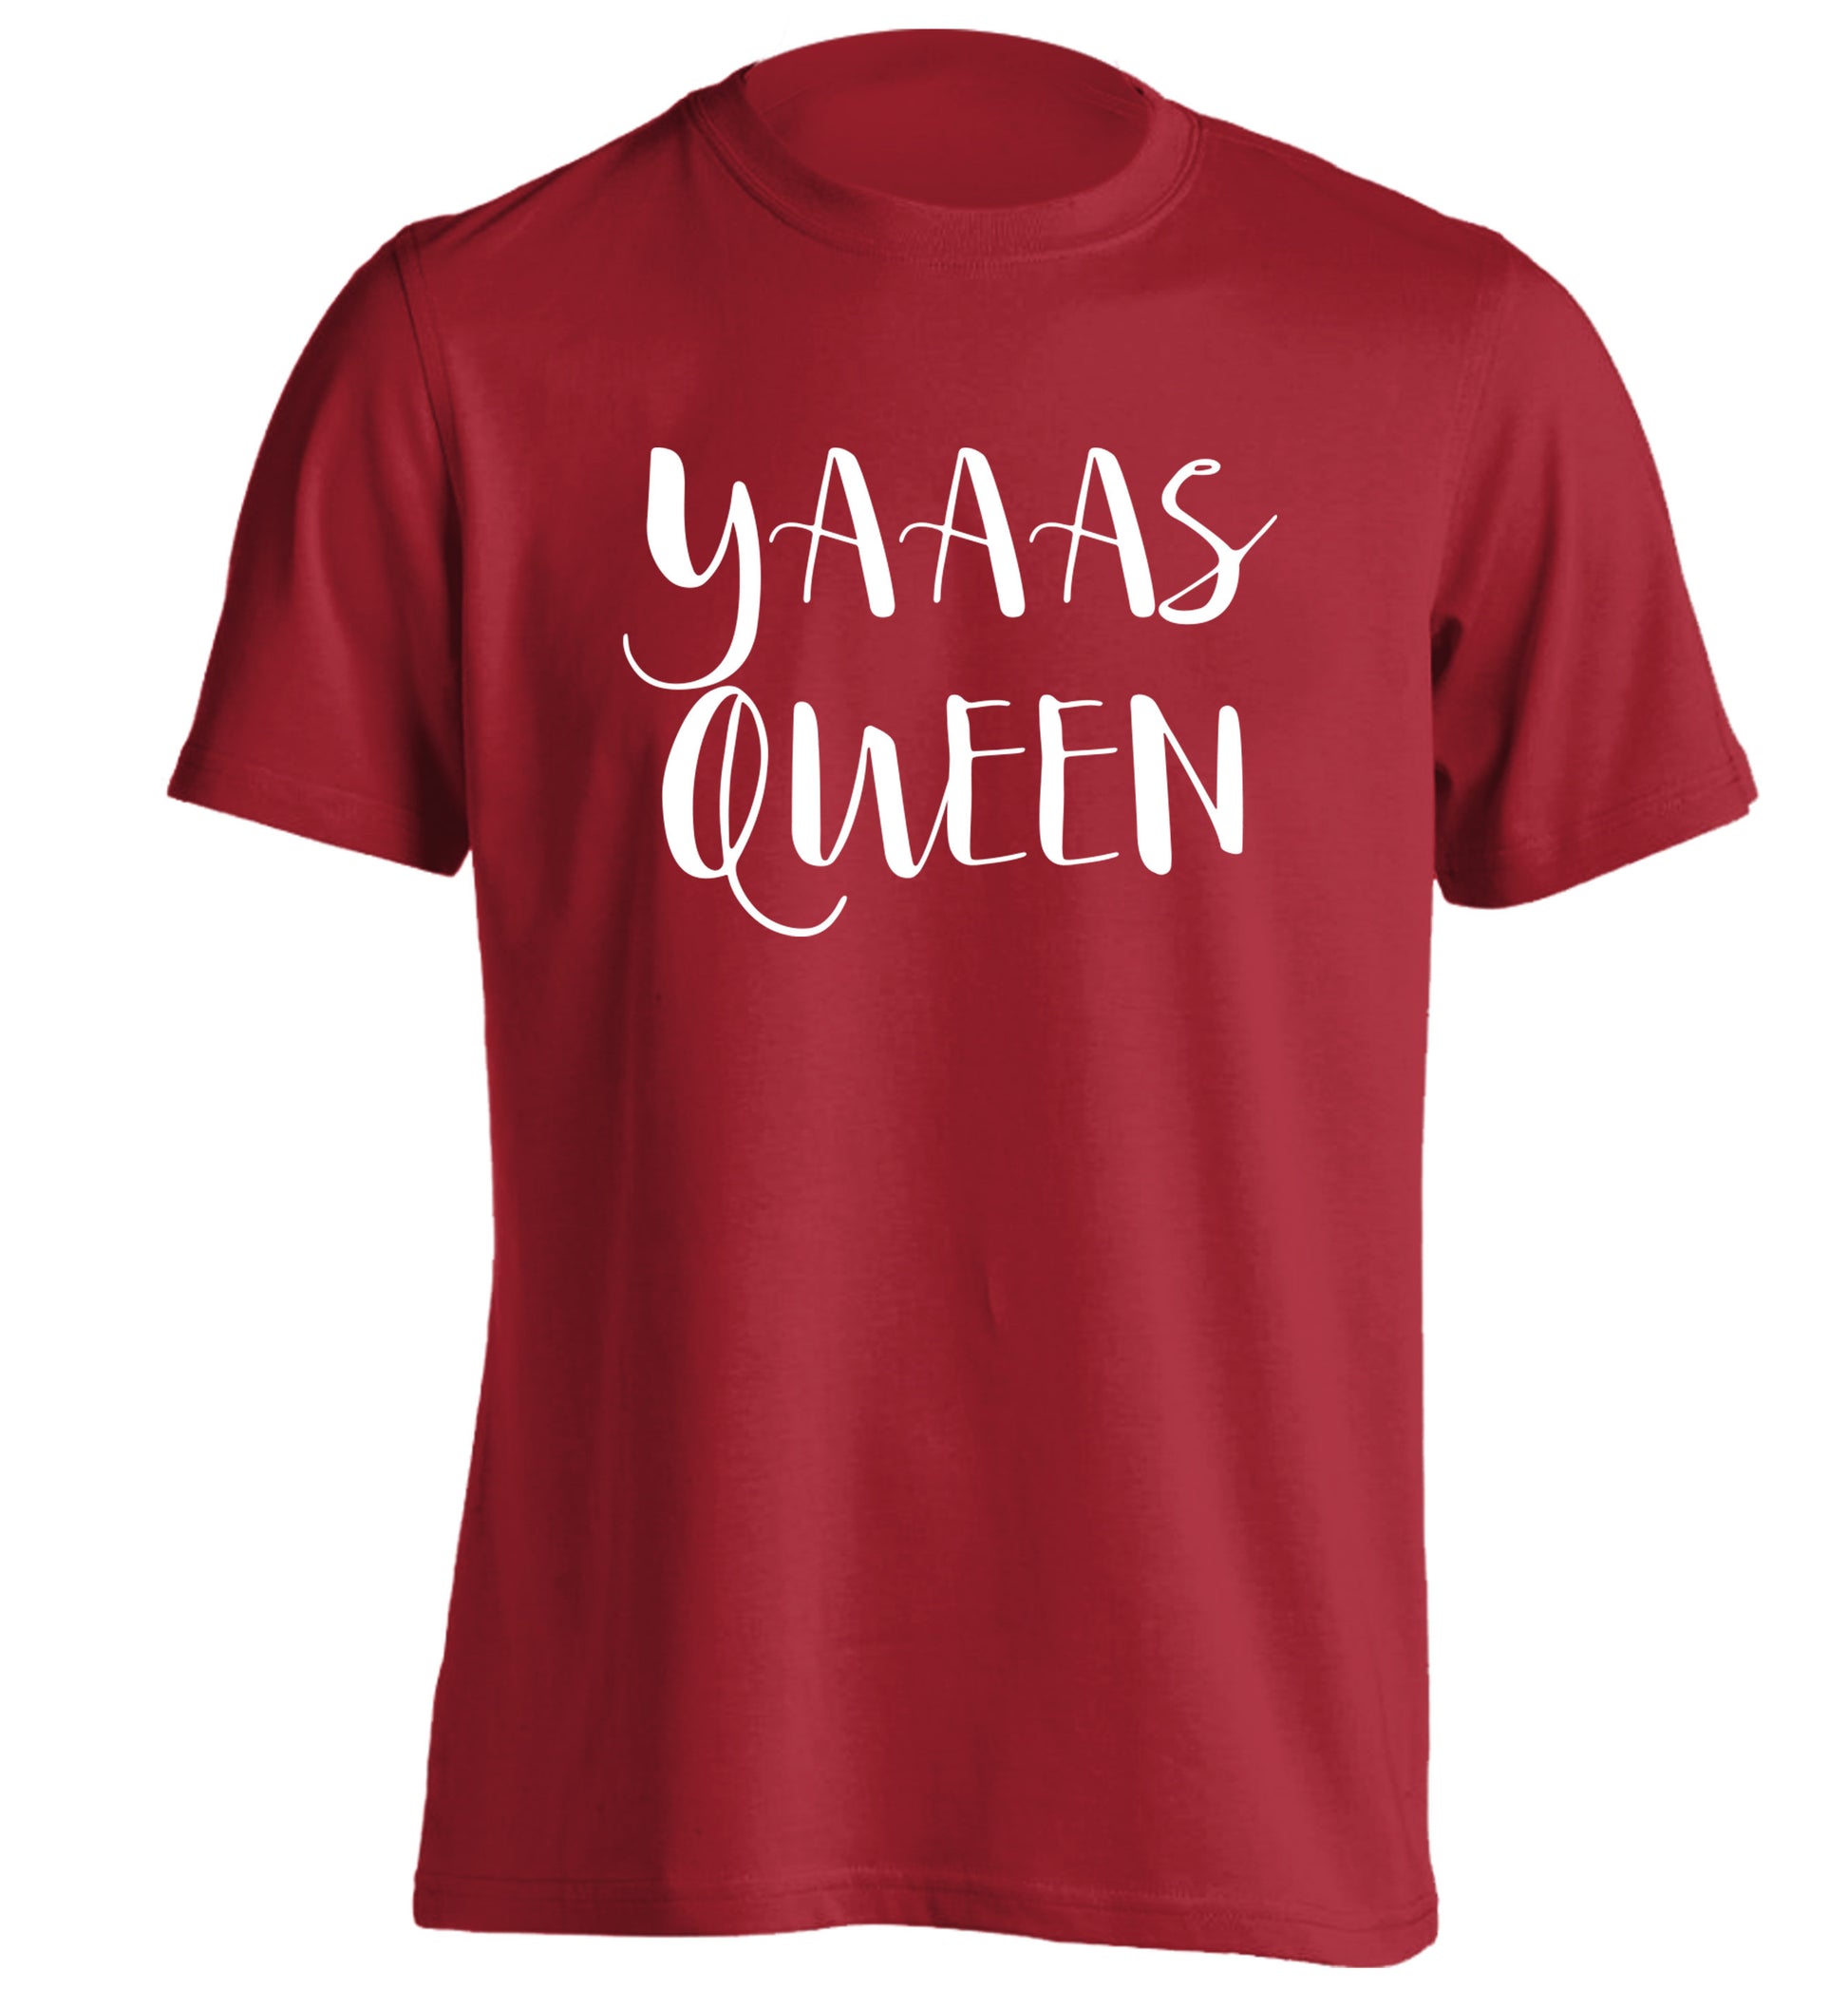 Yas Queen adults unisex red Tshirt 2XL